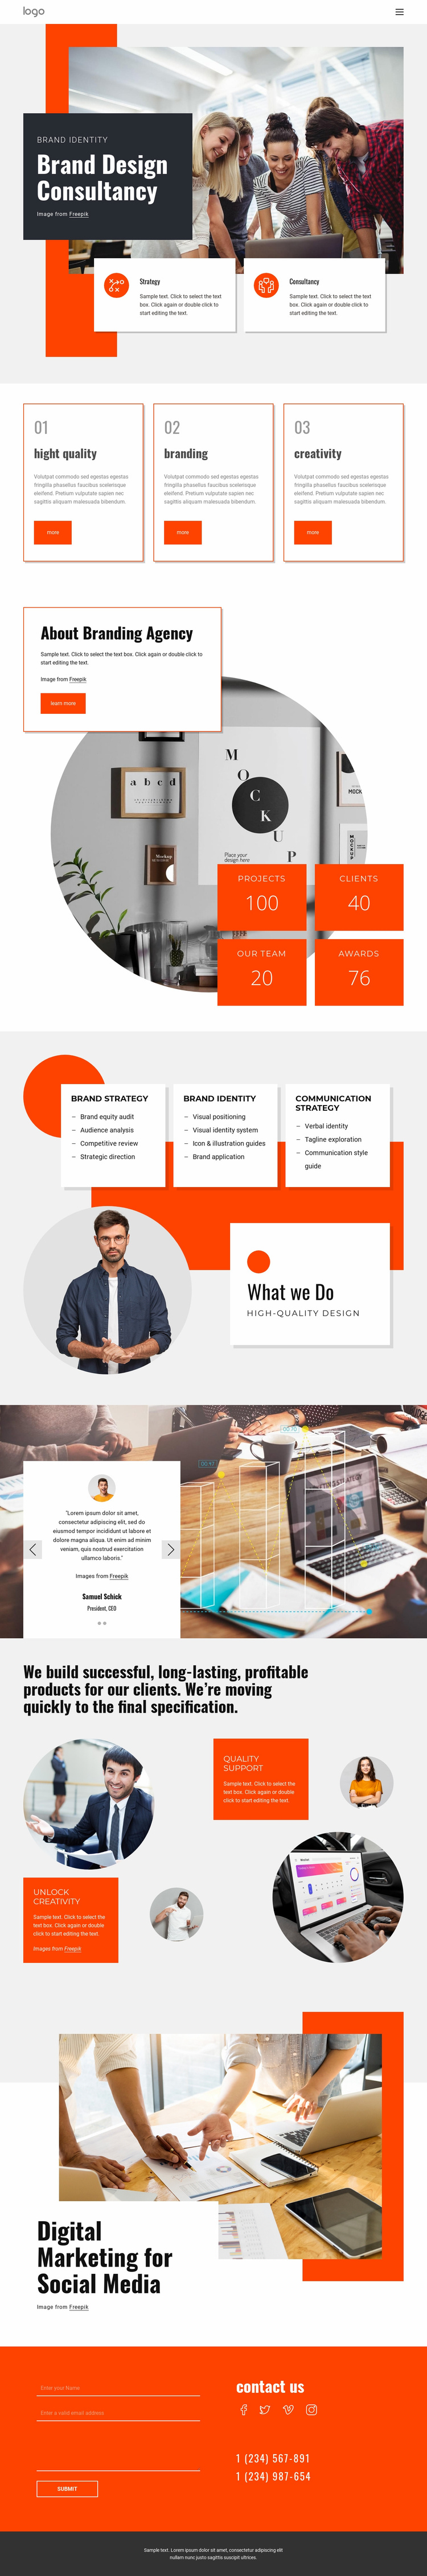 Growth design agency Website Template